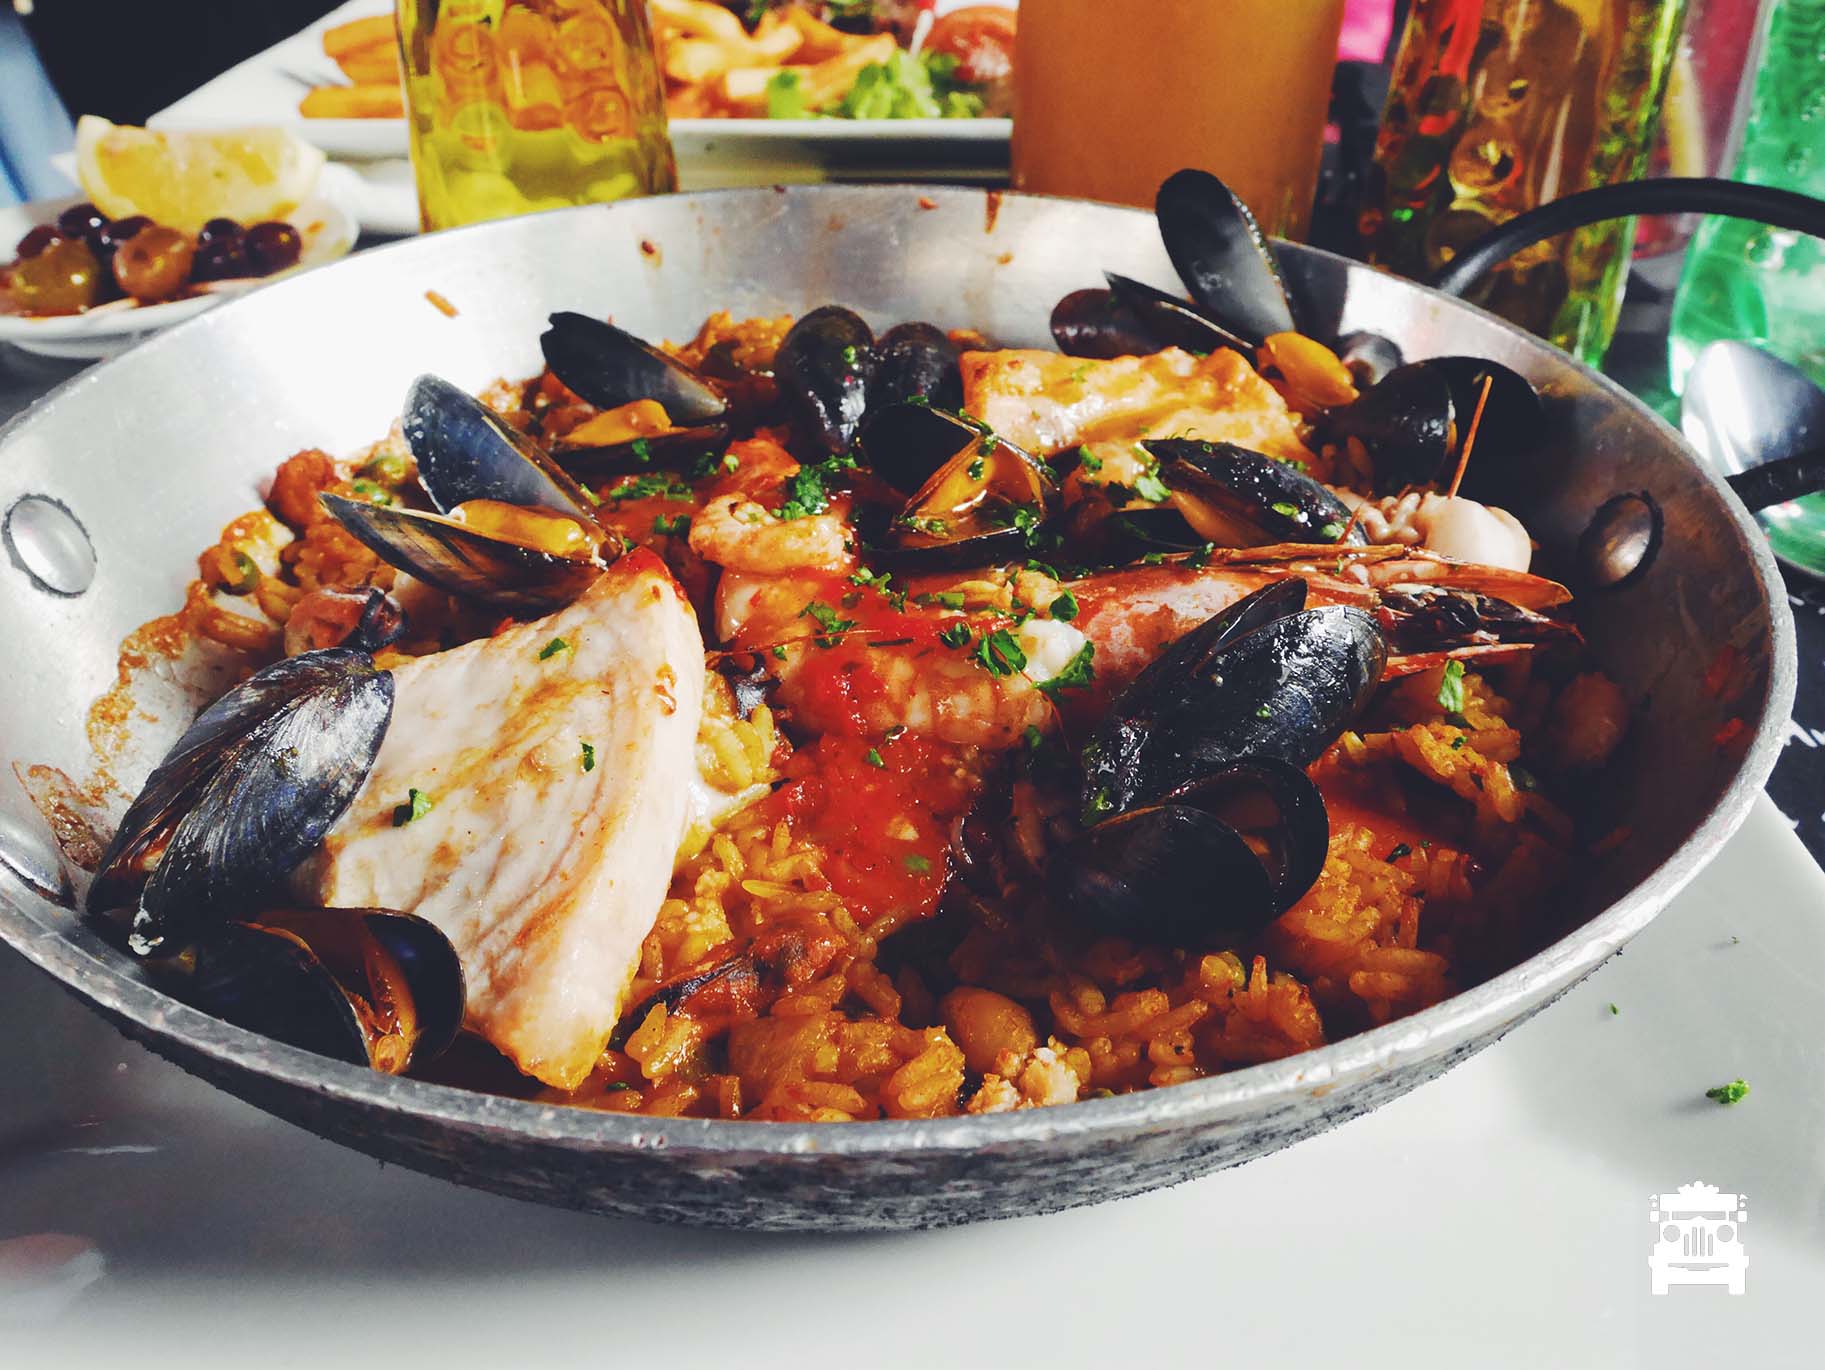 One of the best paella I've ever tasted